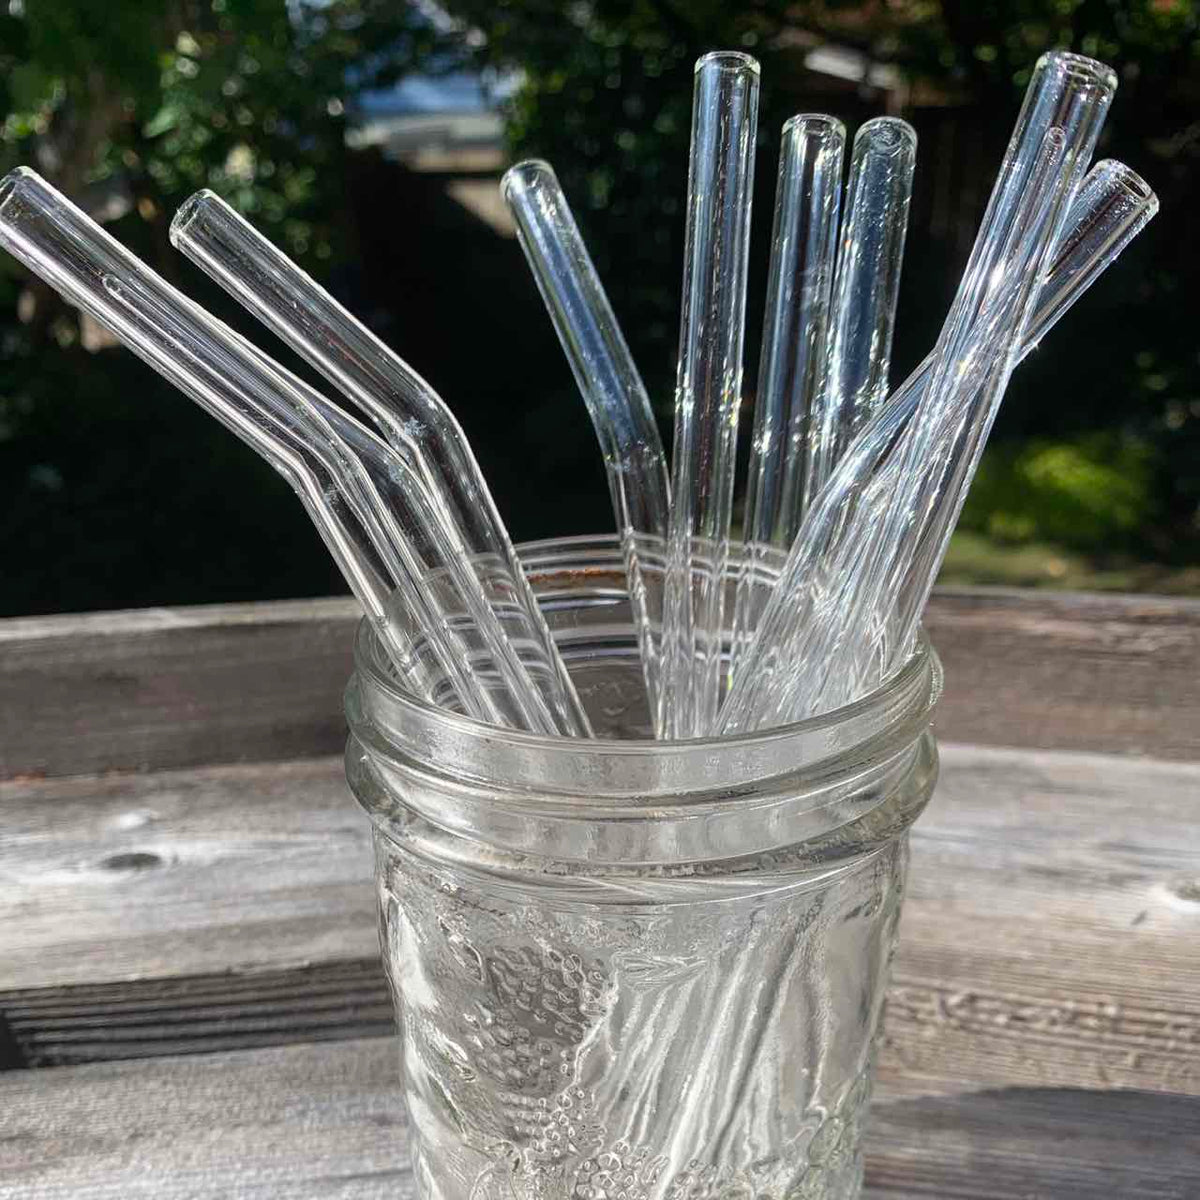 Glass Straws Party Packs - 10 or 20 straws! - GlassSipper